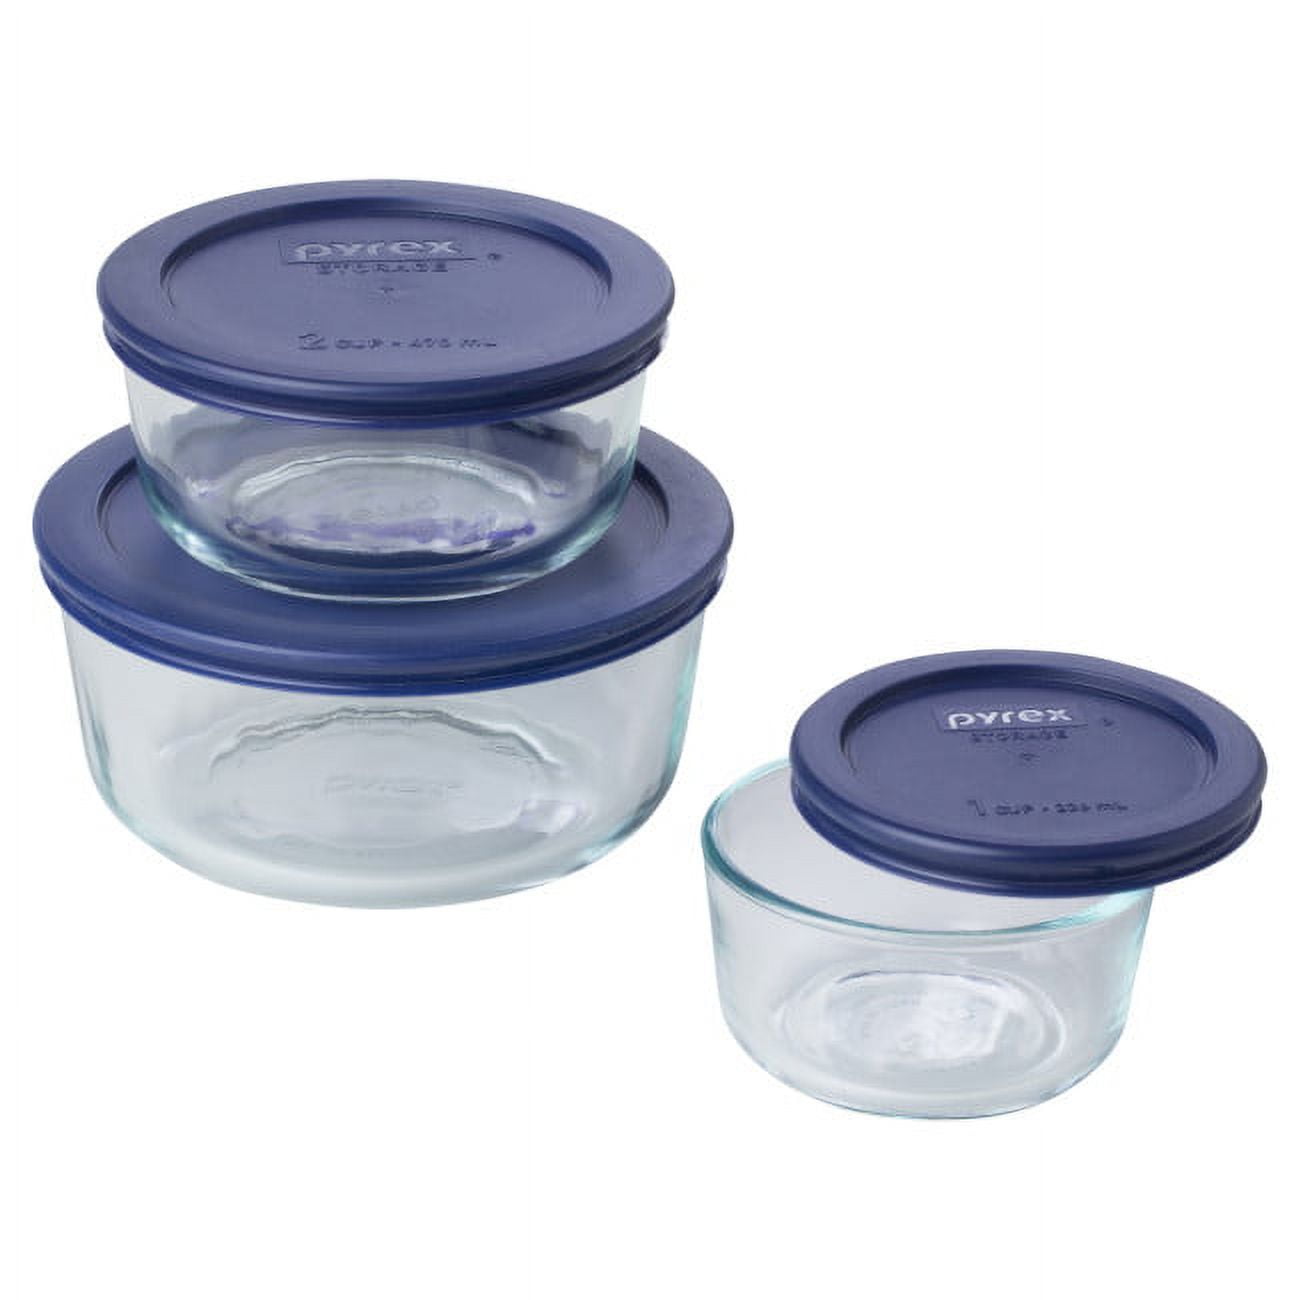 Pyrex Simply Store Glass Round Food Container Set with Blue Lids (6-Piece)